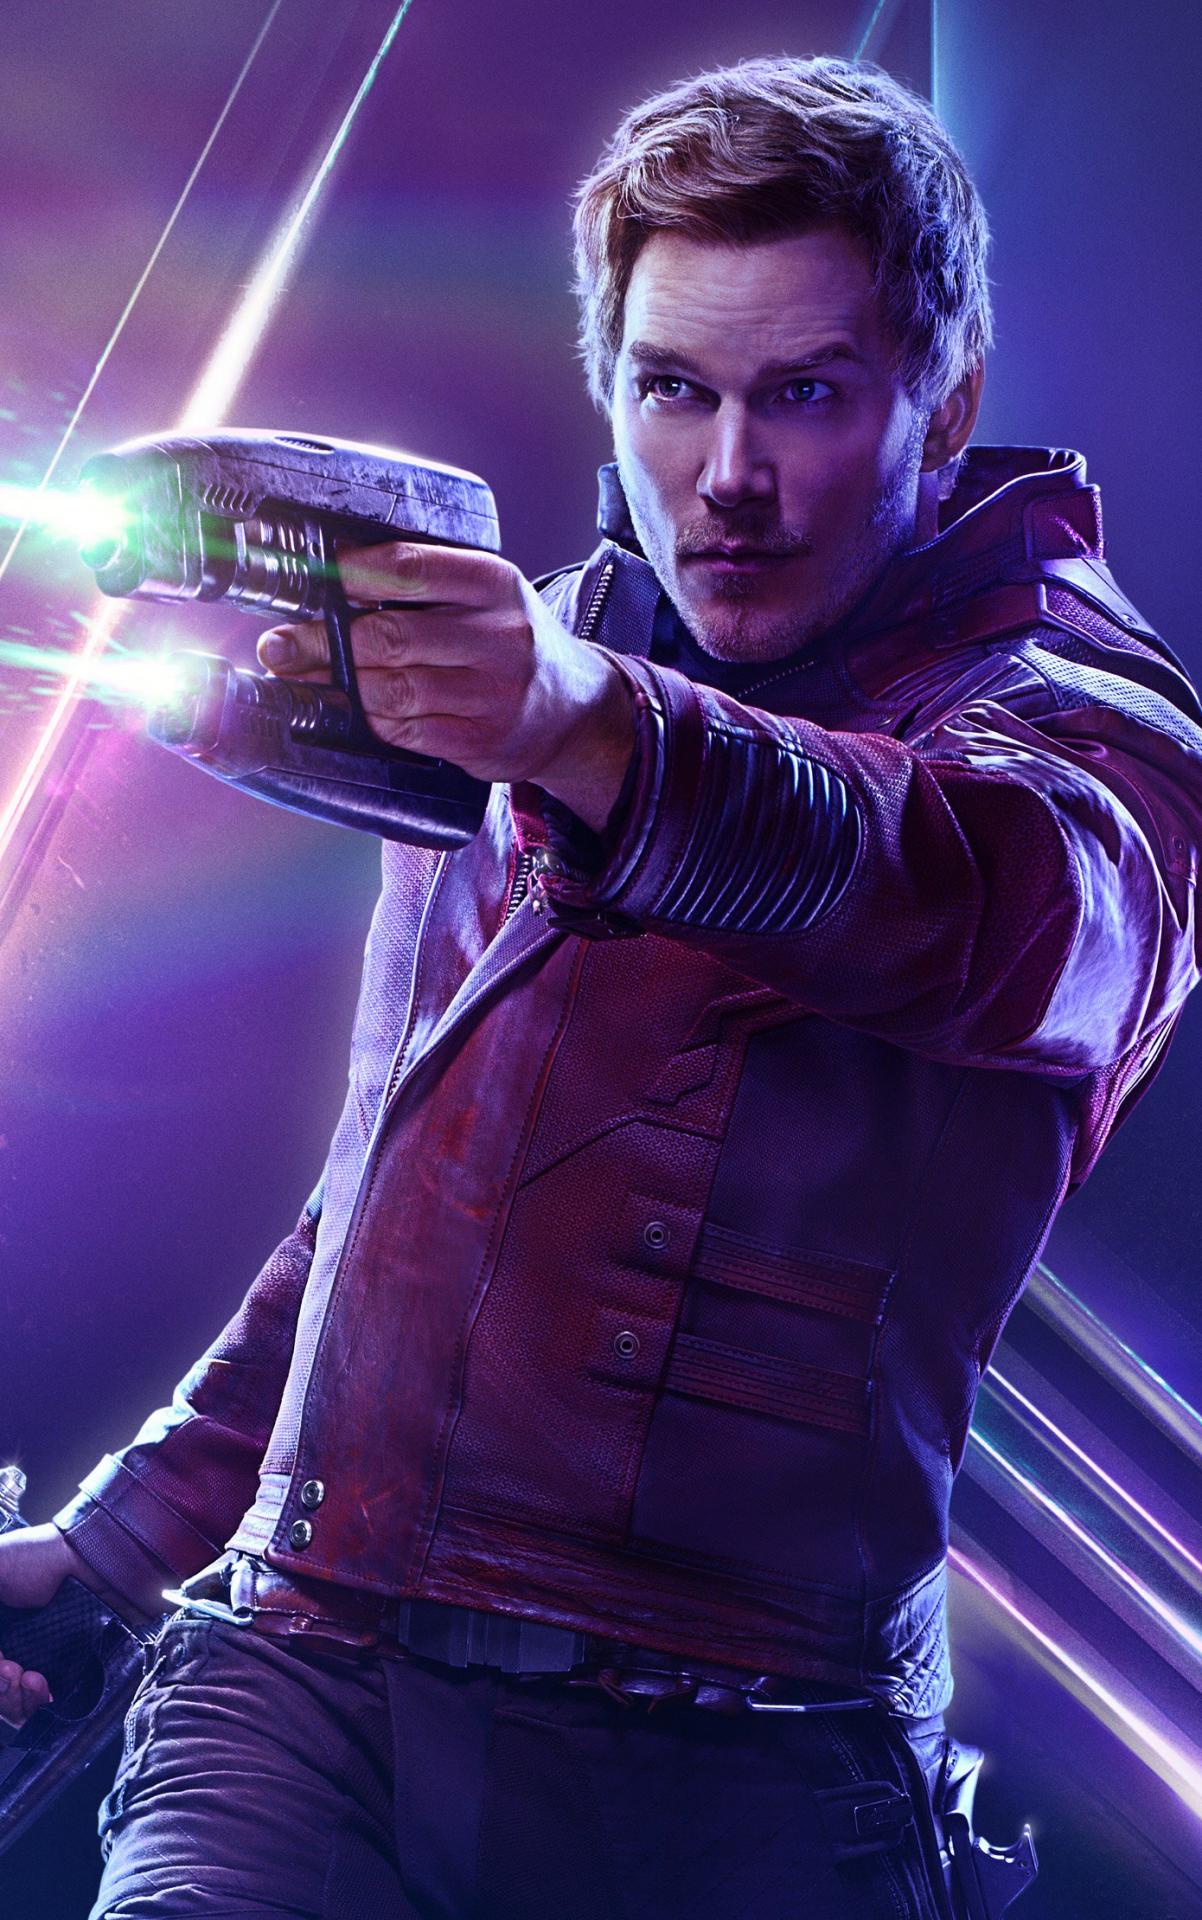 Avengers infinity war star lord poster